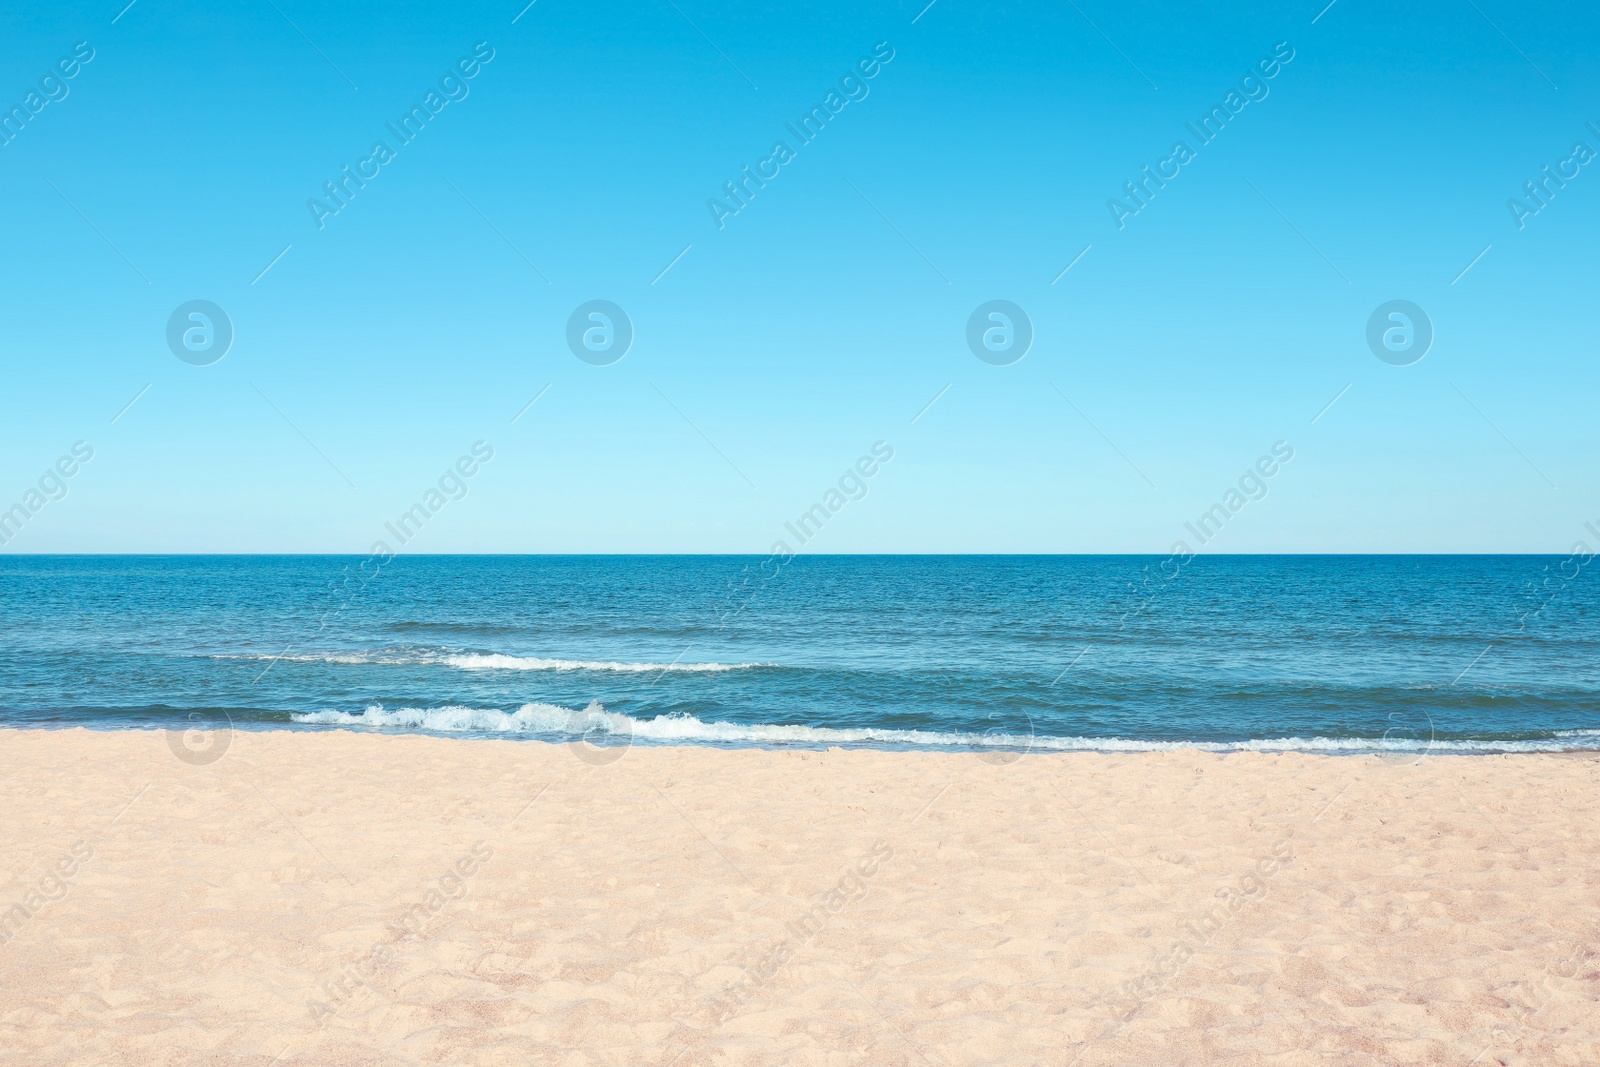 Photo of Picturesque view of sandy beach near sea